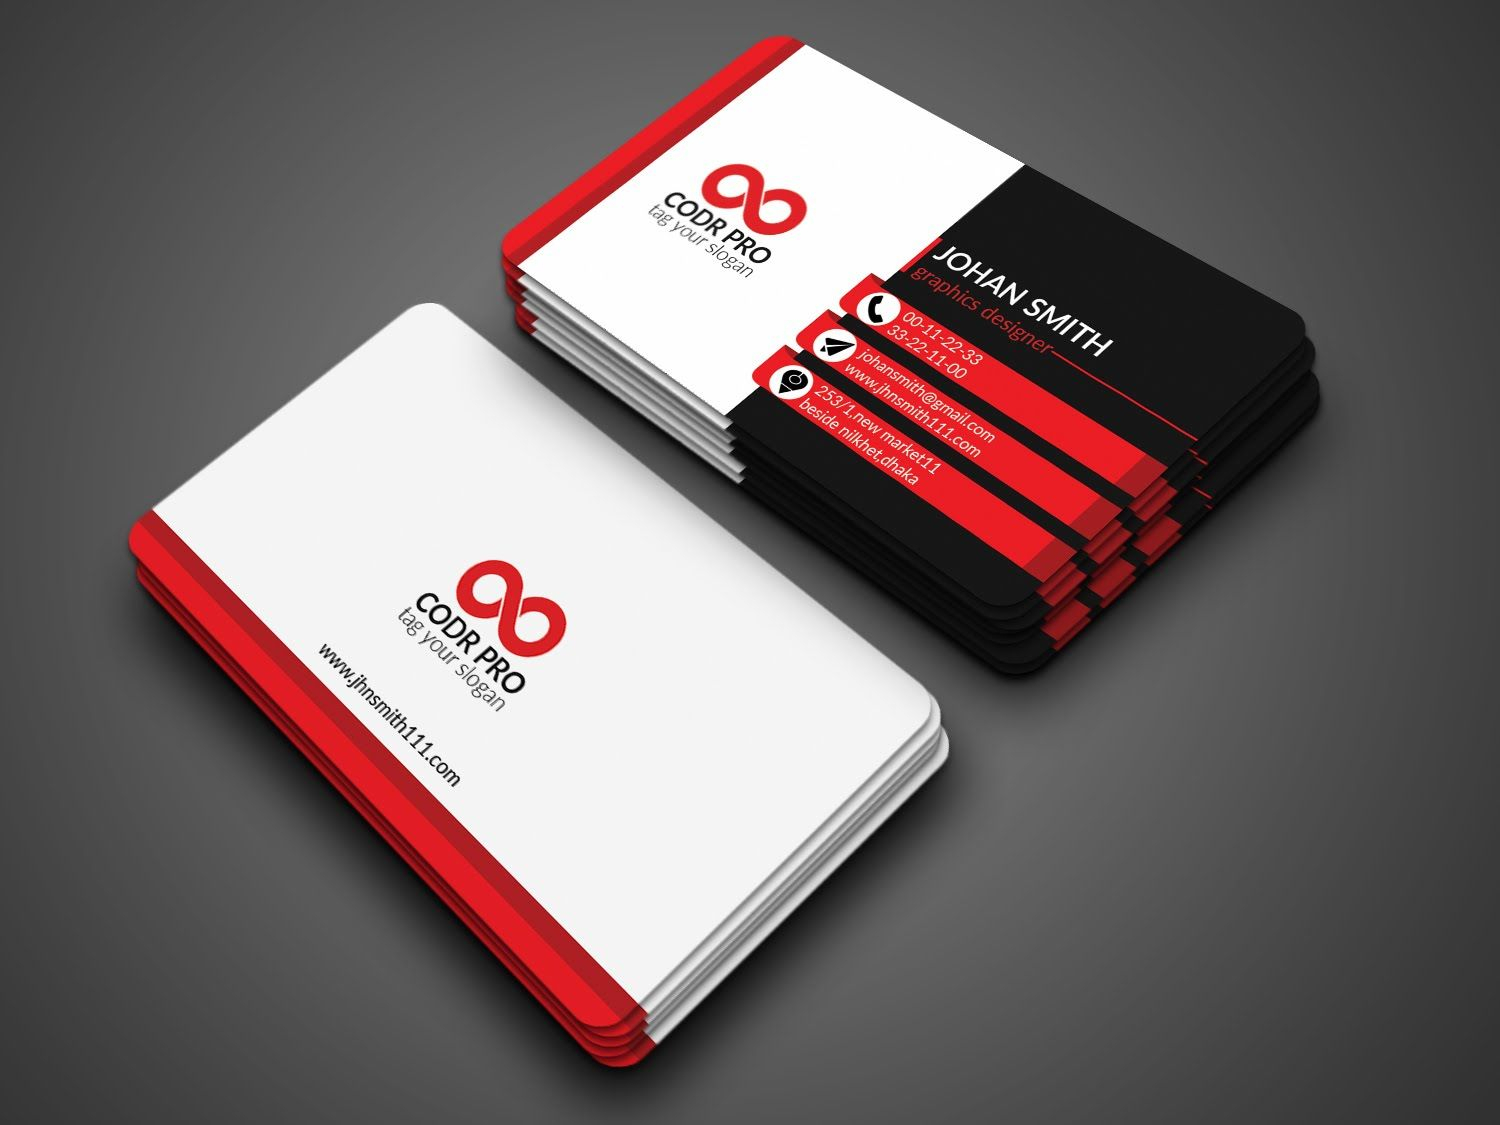 Professional Business Card Design In Photoshop Cs6 Tutorial In Business Card Template Photoshop Cs6